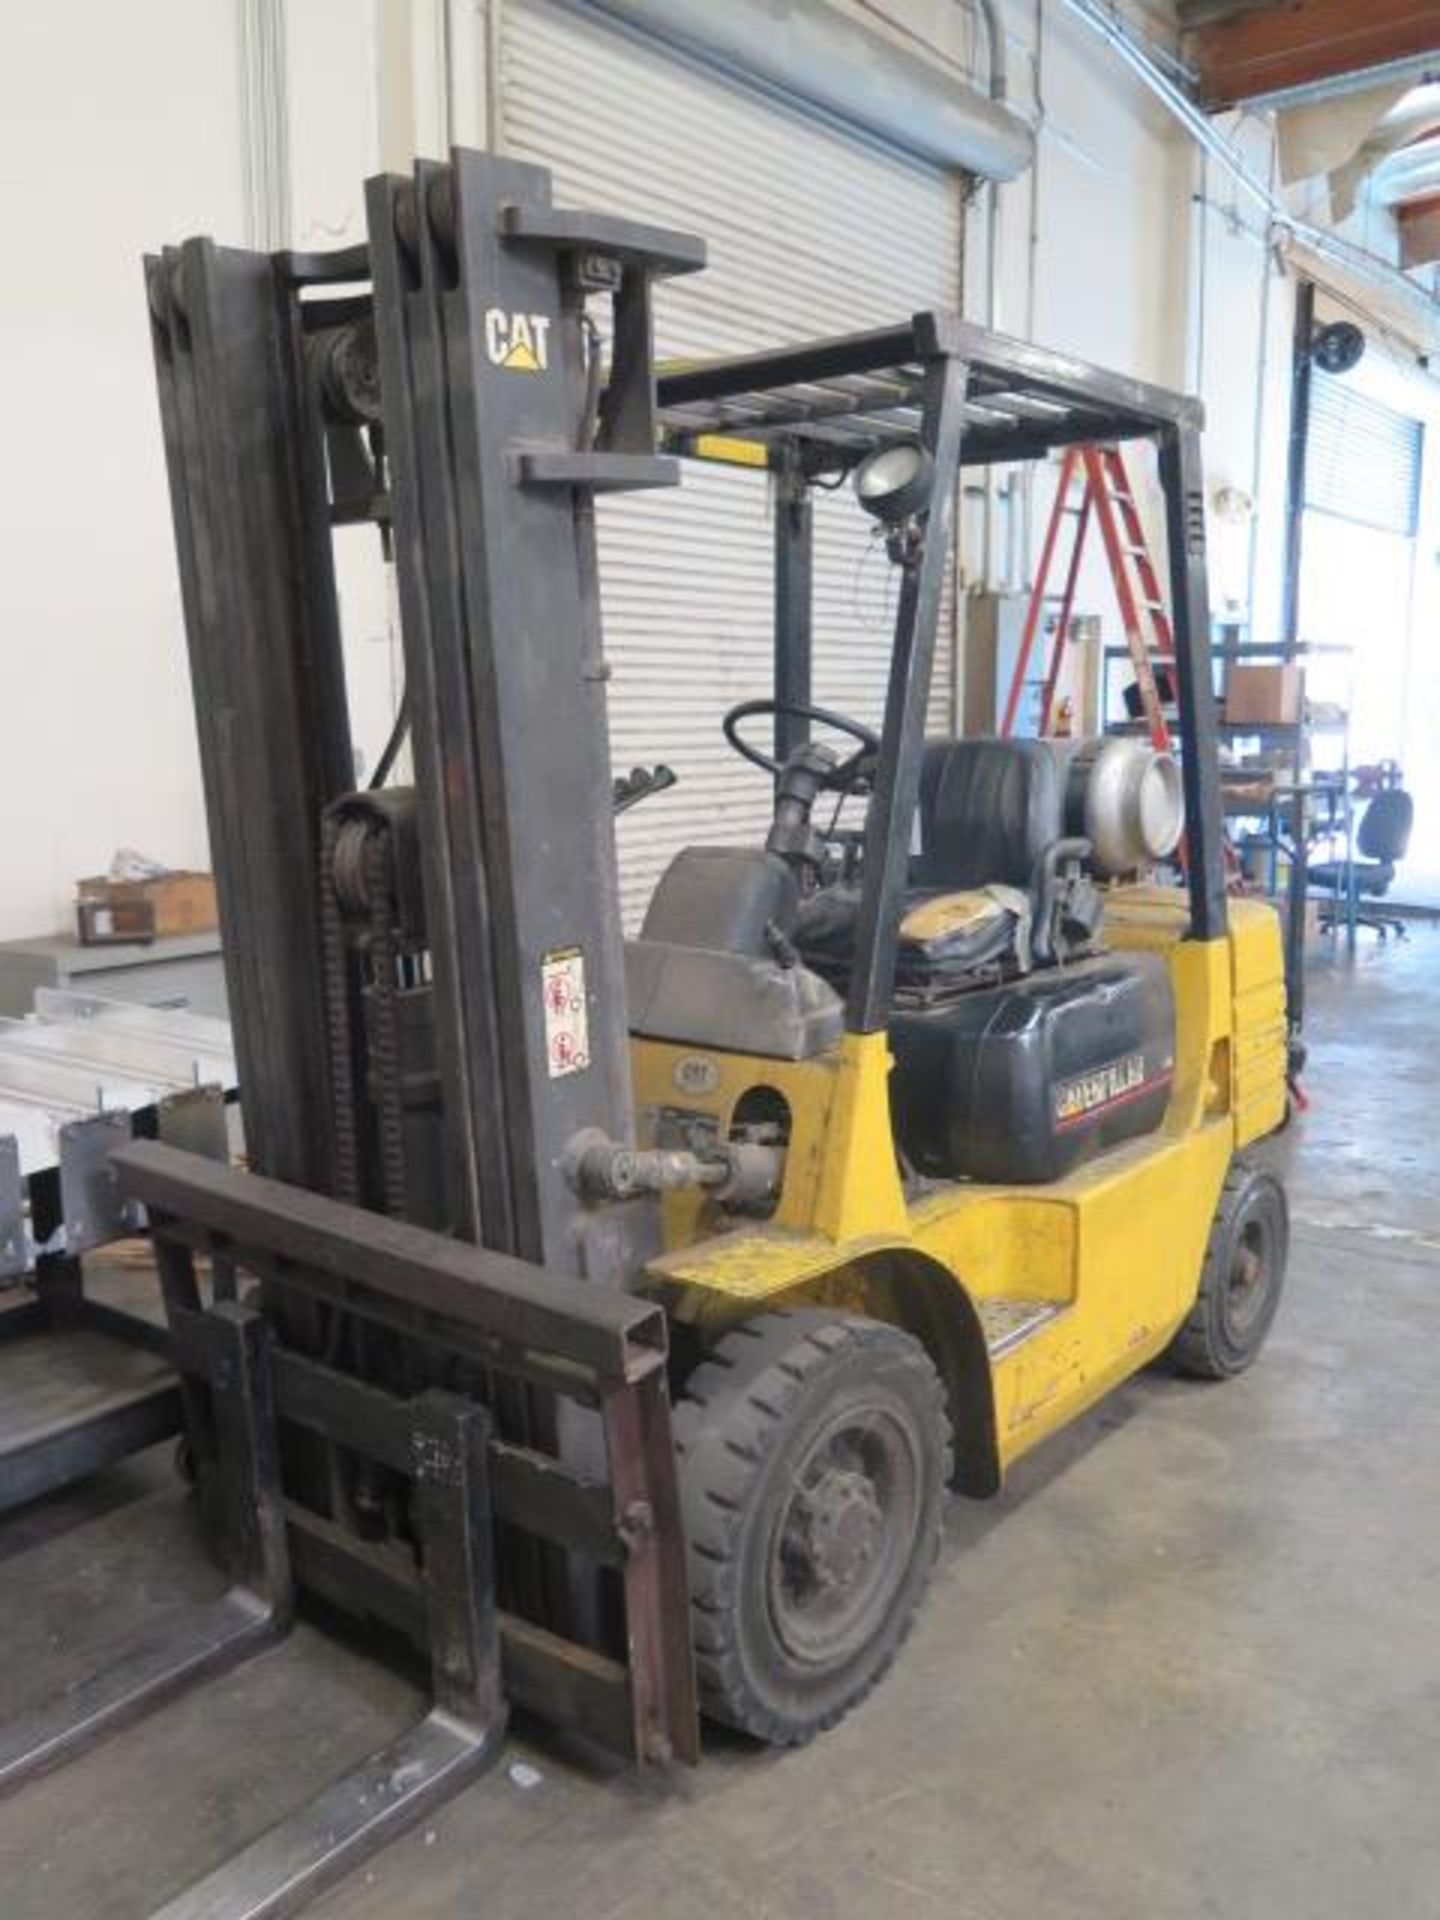 Caterpillar GP25 5000 Lb Cap LPG Forklift s/n 5AM07772 w/ 3-Stage Mast, 190” Lift Height, SOLD AS IS - Image 2 of 15